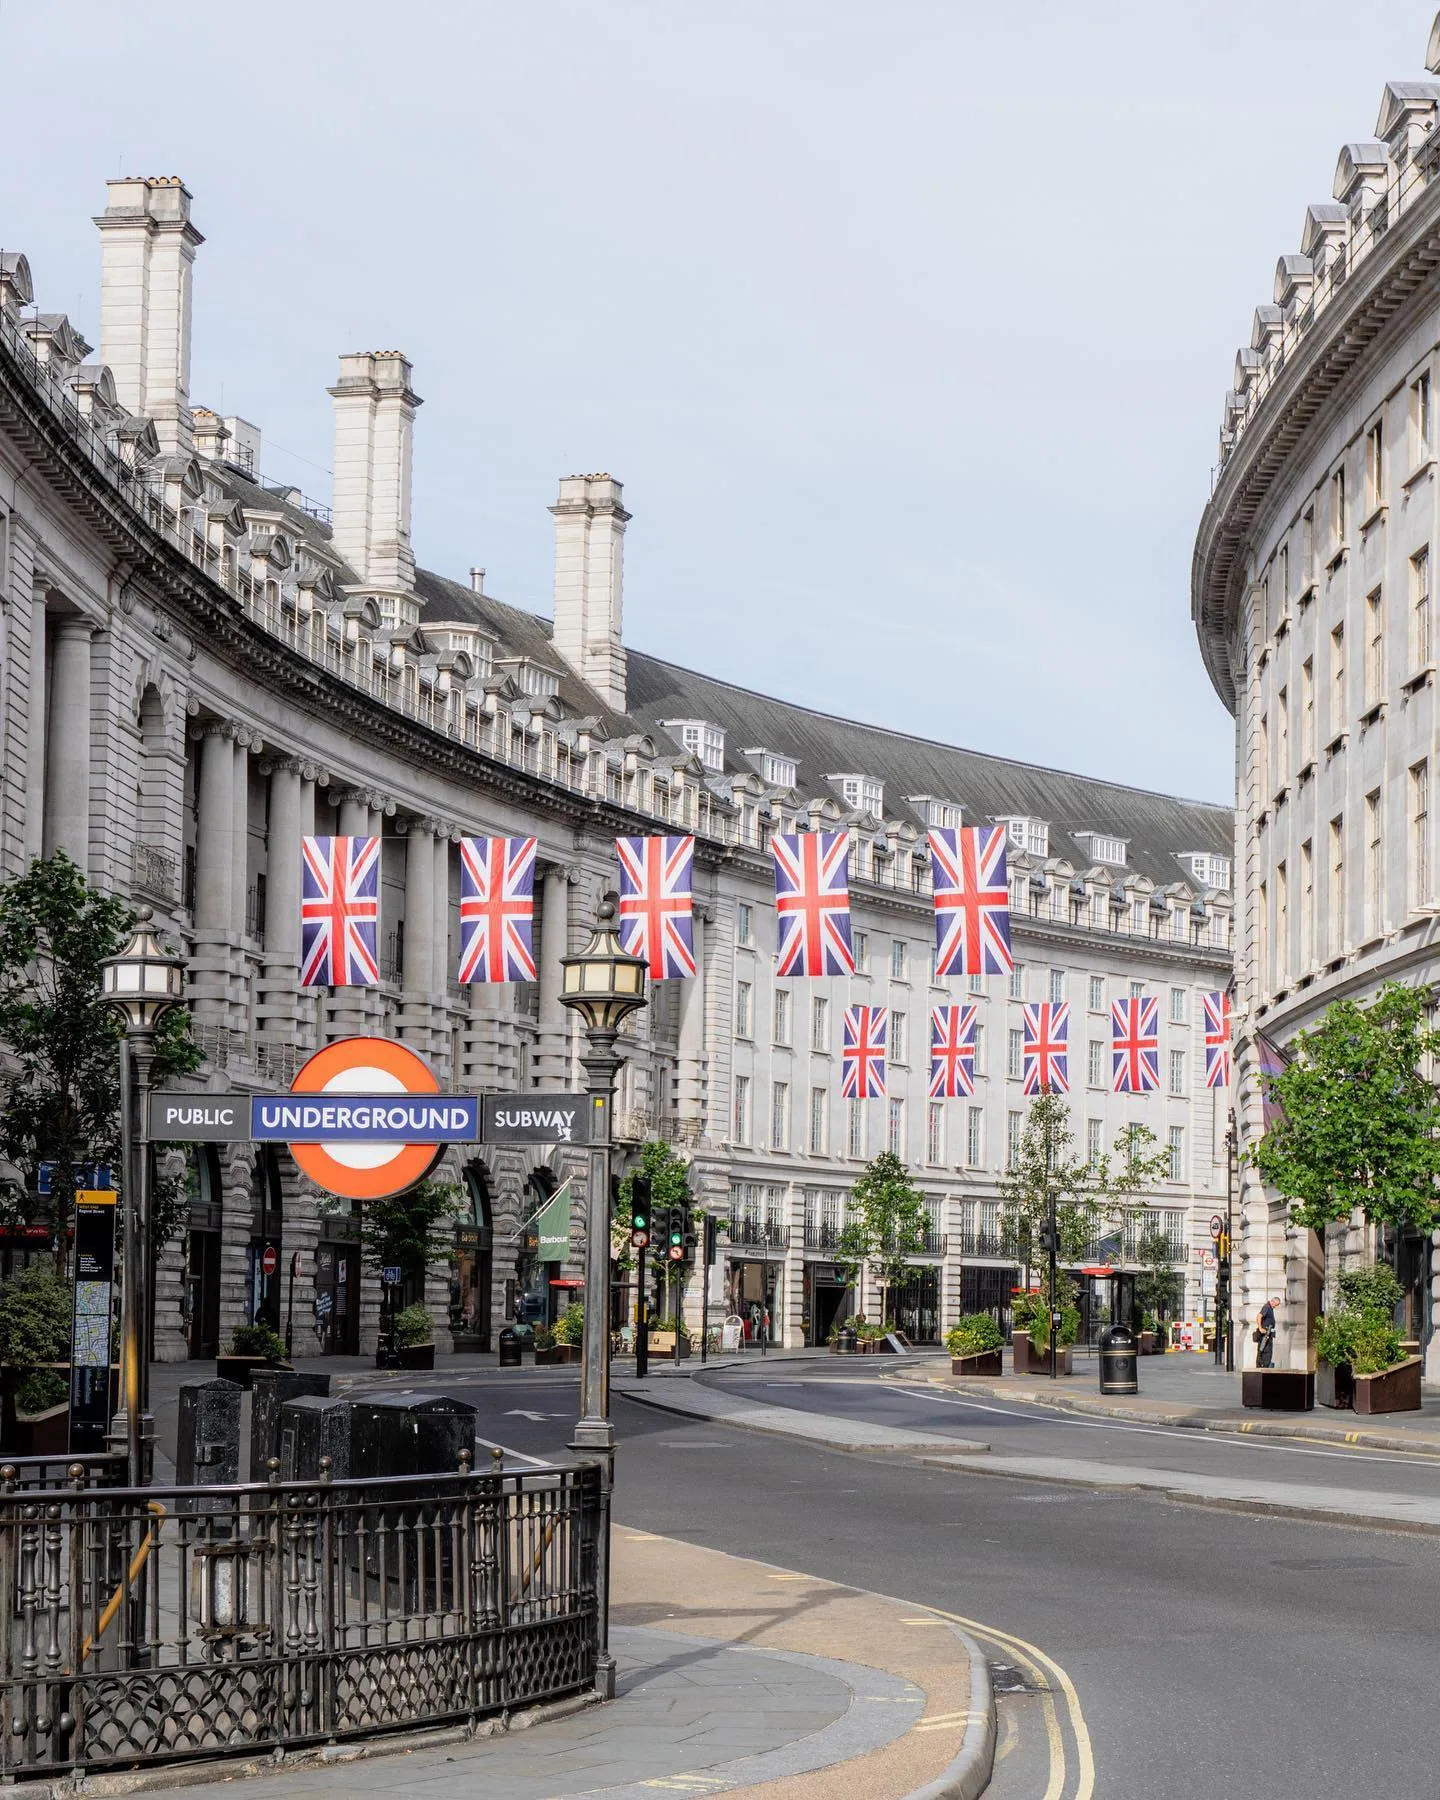 VISIT LONDON - Starting your week off right with the forever iconic, #regentstreetw1